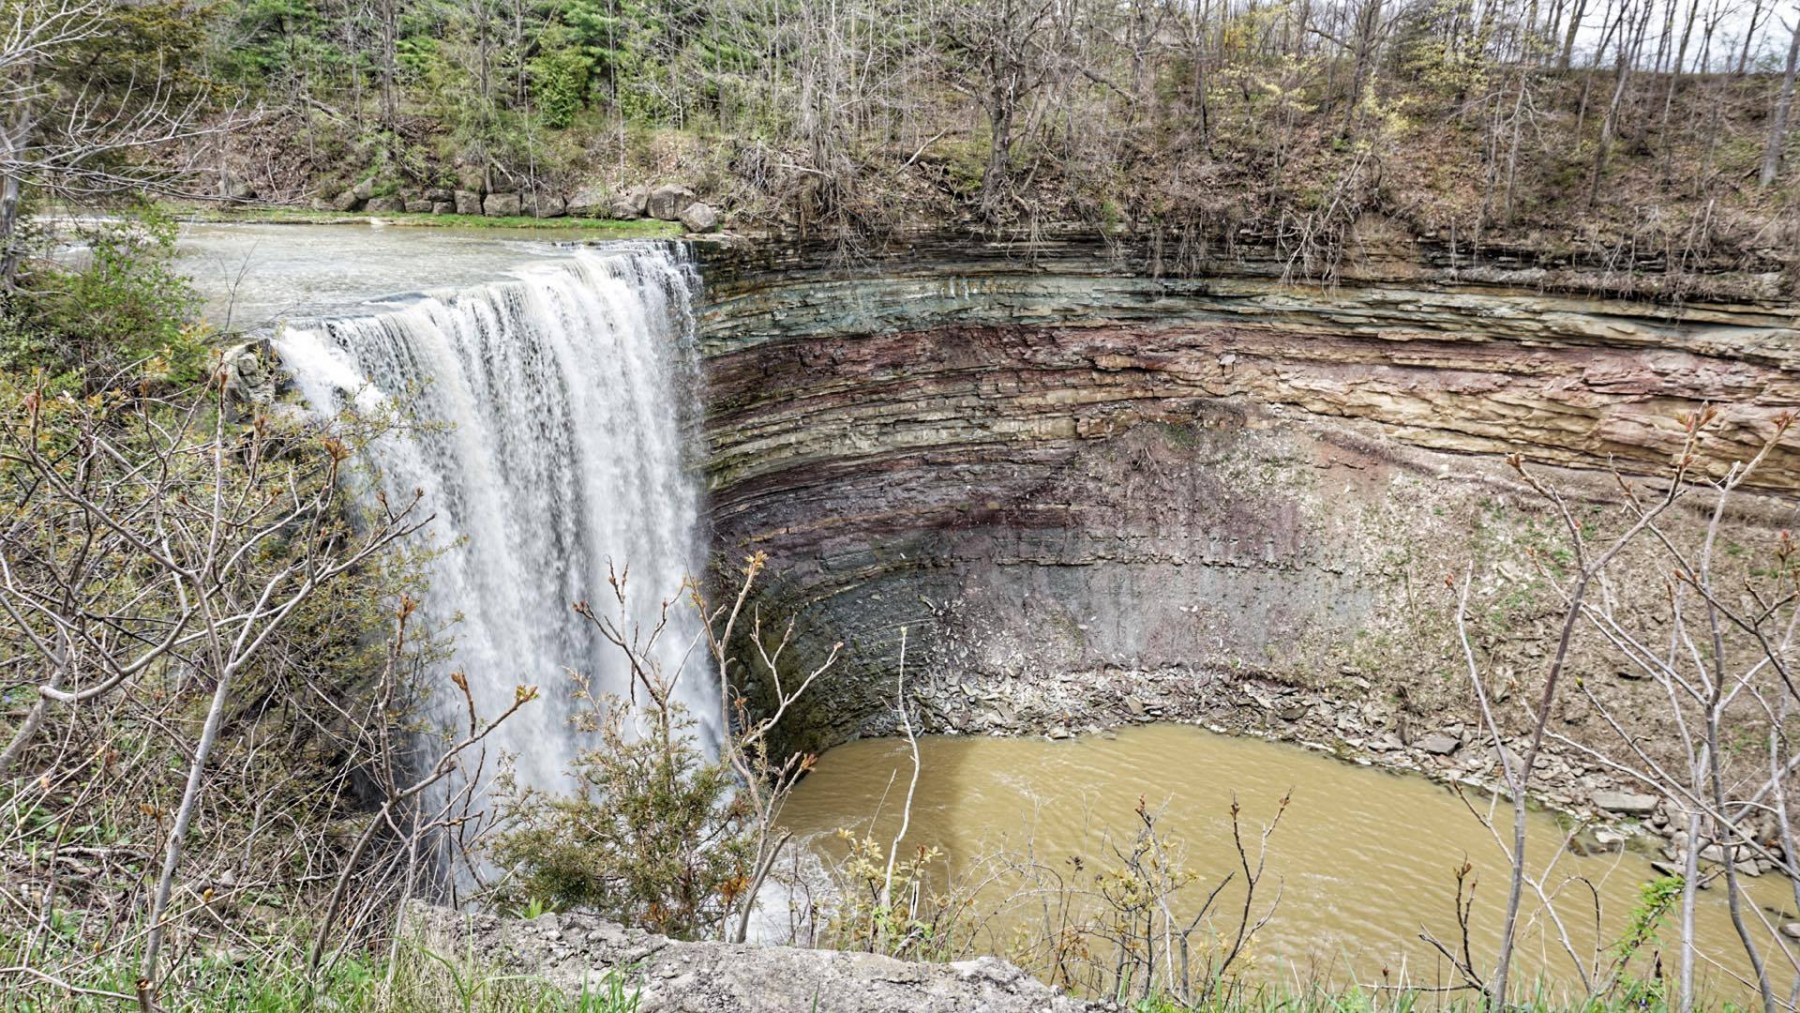 Ball’s Falls Conservation Area